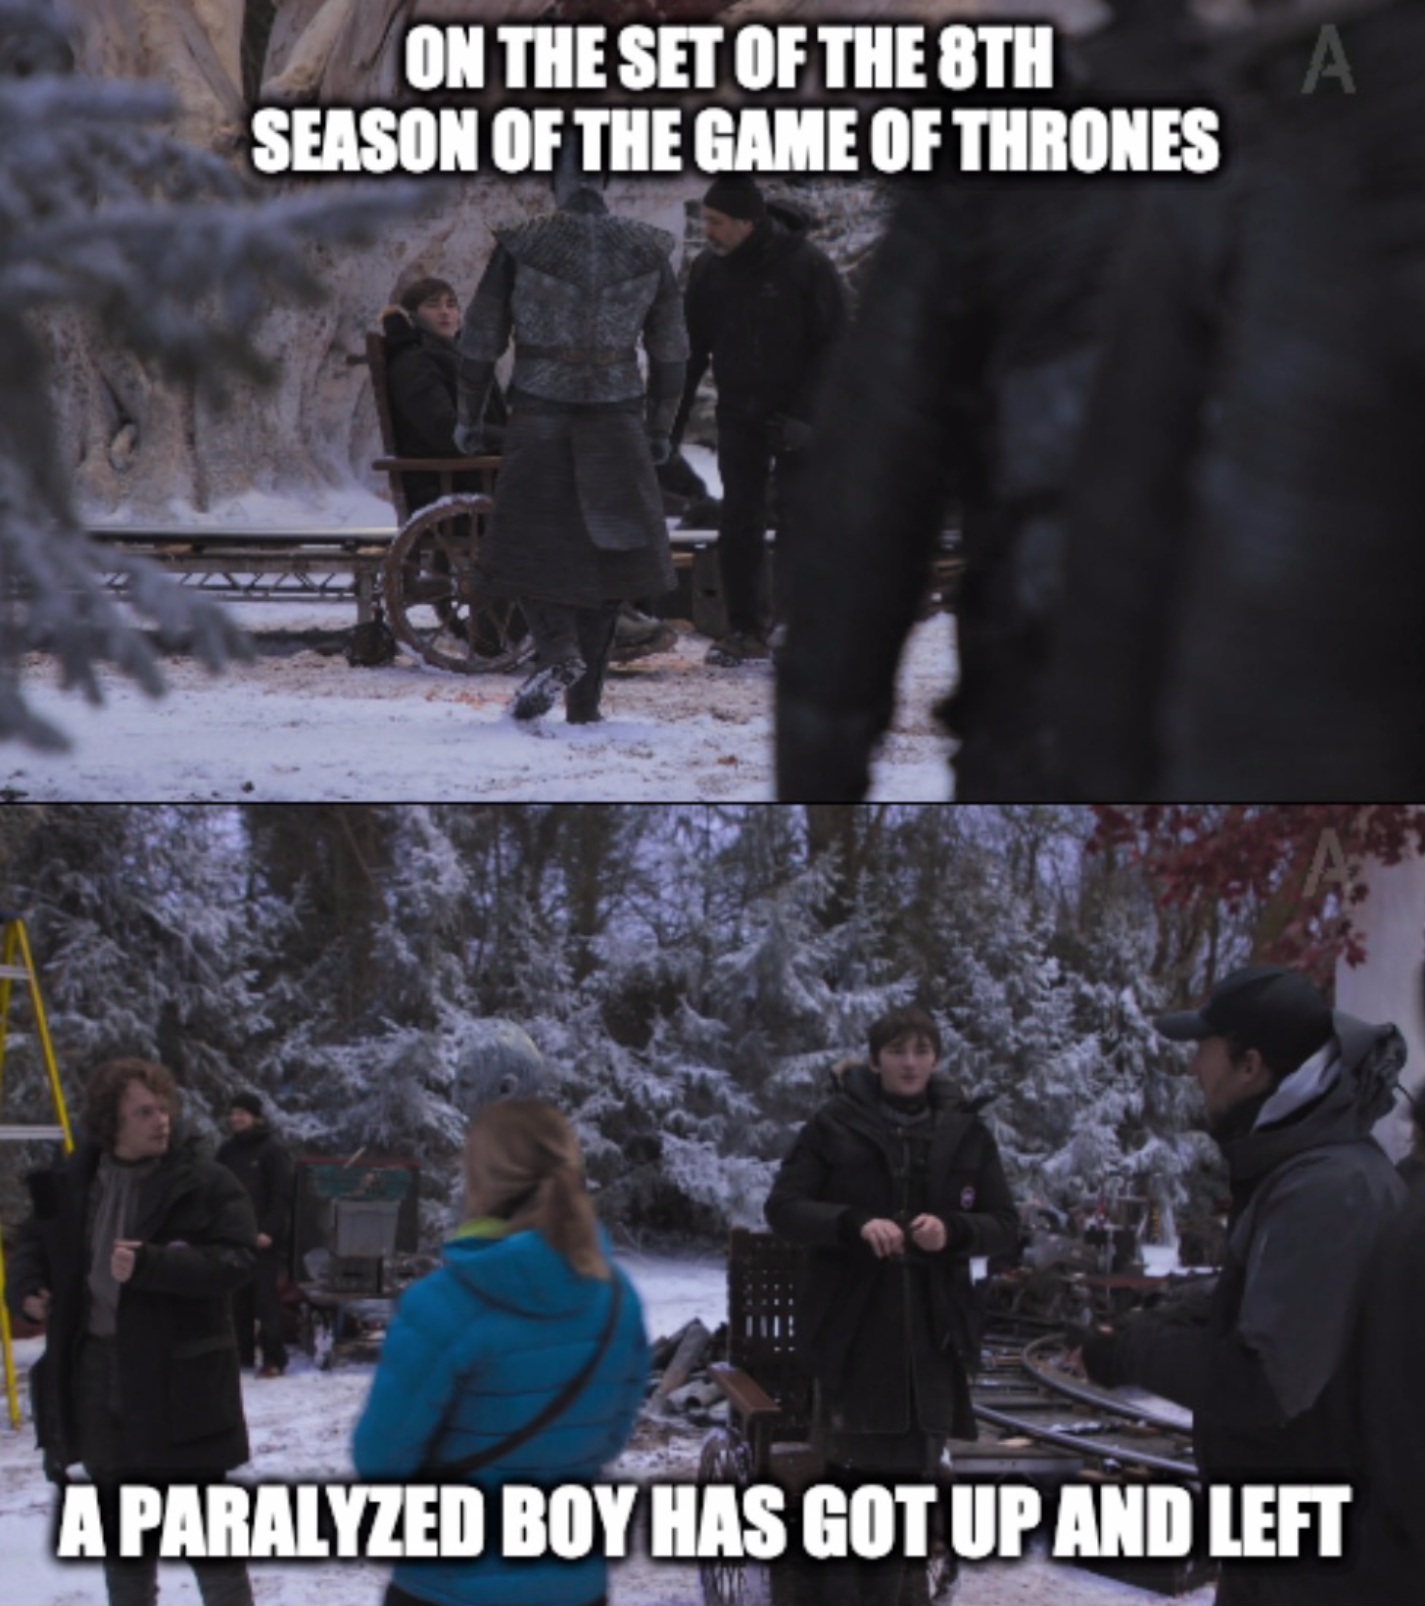 This show is full of wonders. - Game of Thrones, Game of Thrones season 8, Spoiler, Bran Stark, Isaac Hempstead-Wright, Photos from filming